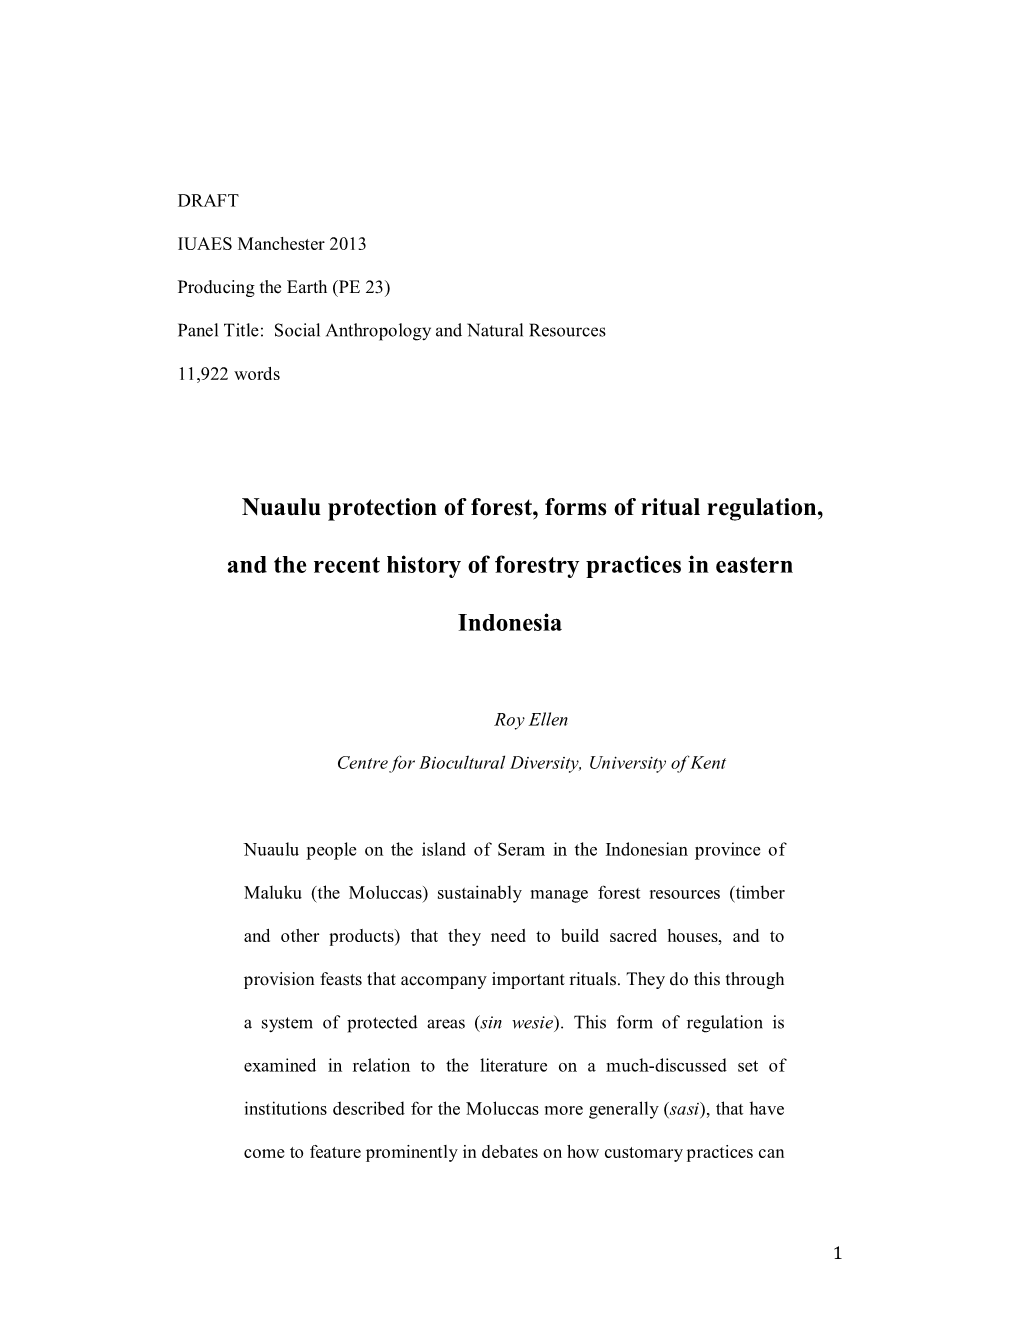 Nuaulu Protection of Forest, Forms of Ritual Regulation, and the Recent